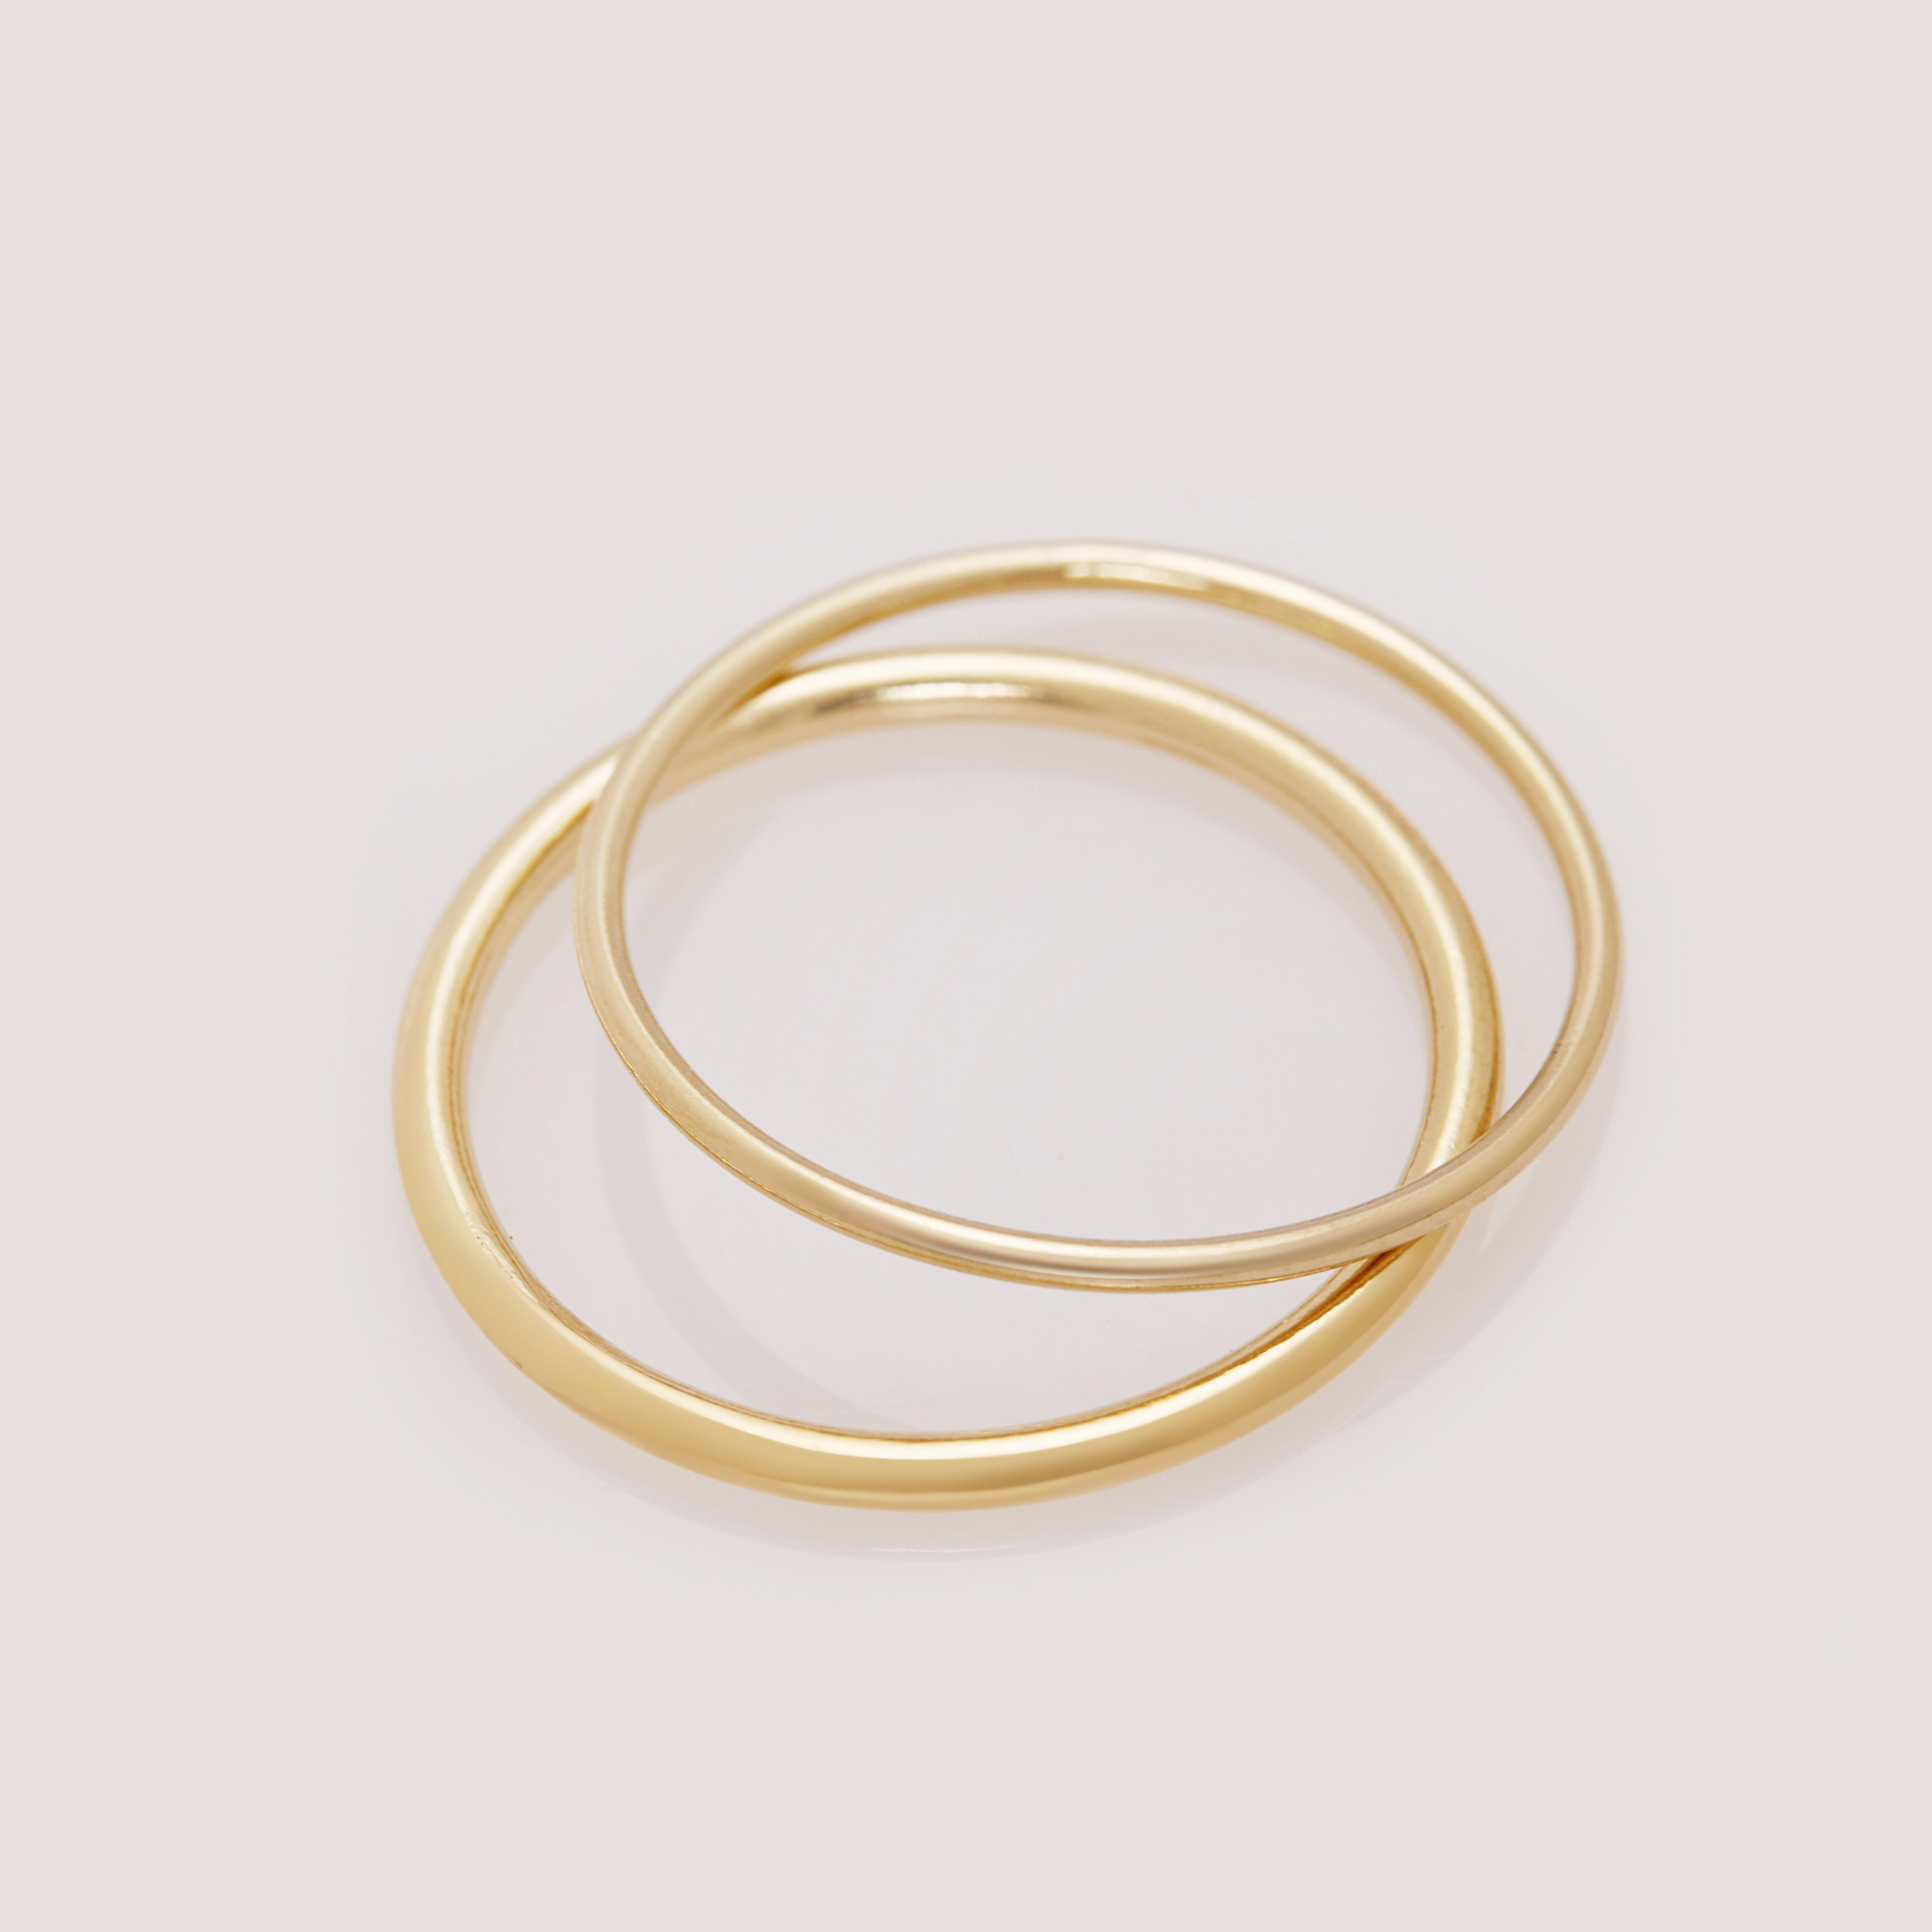 1PCS 1MM Wire Simple Thin 14K Gold Filled Ring,Minimalist Ring,Simple Gold Filled Ring,Stackable Ring,DIY Ring Supplies 1294749 - Click Image to Close